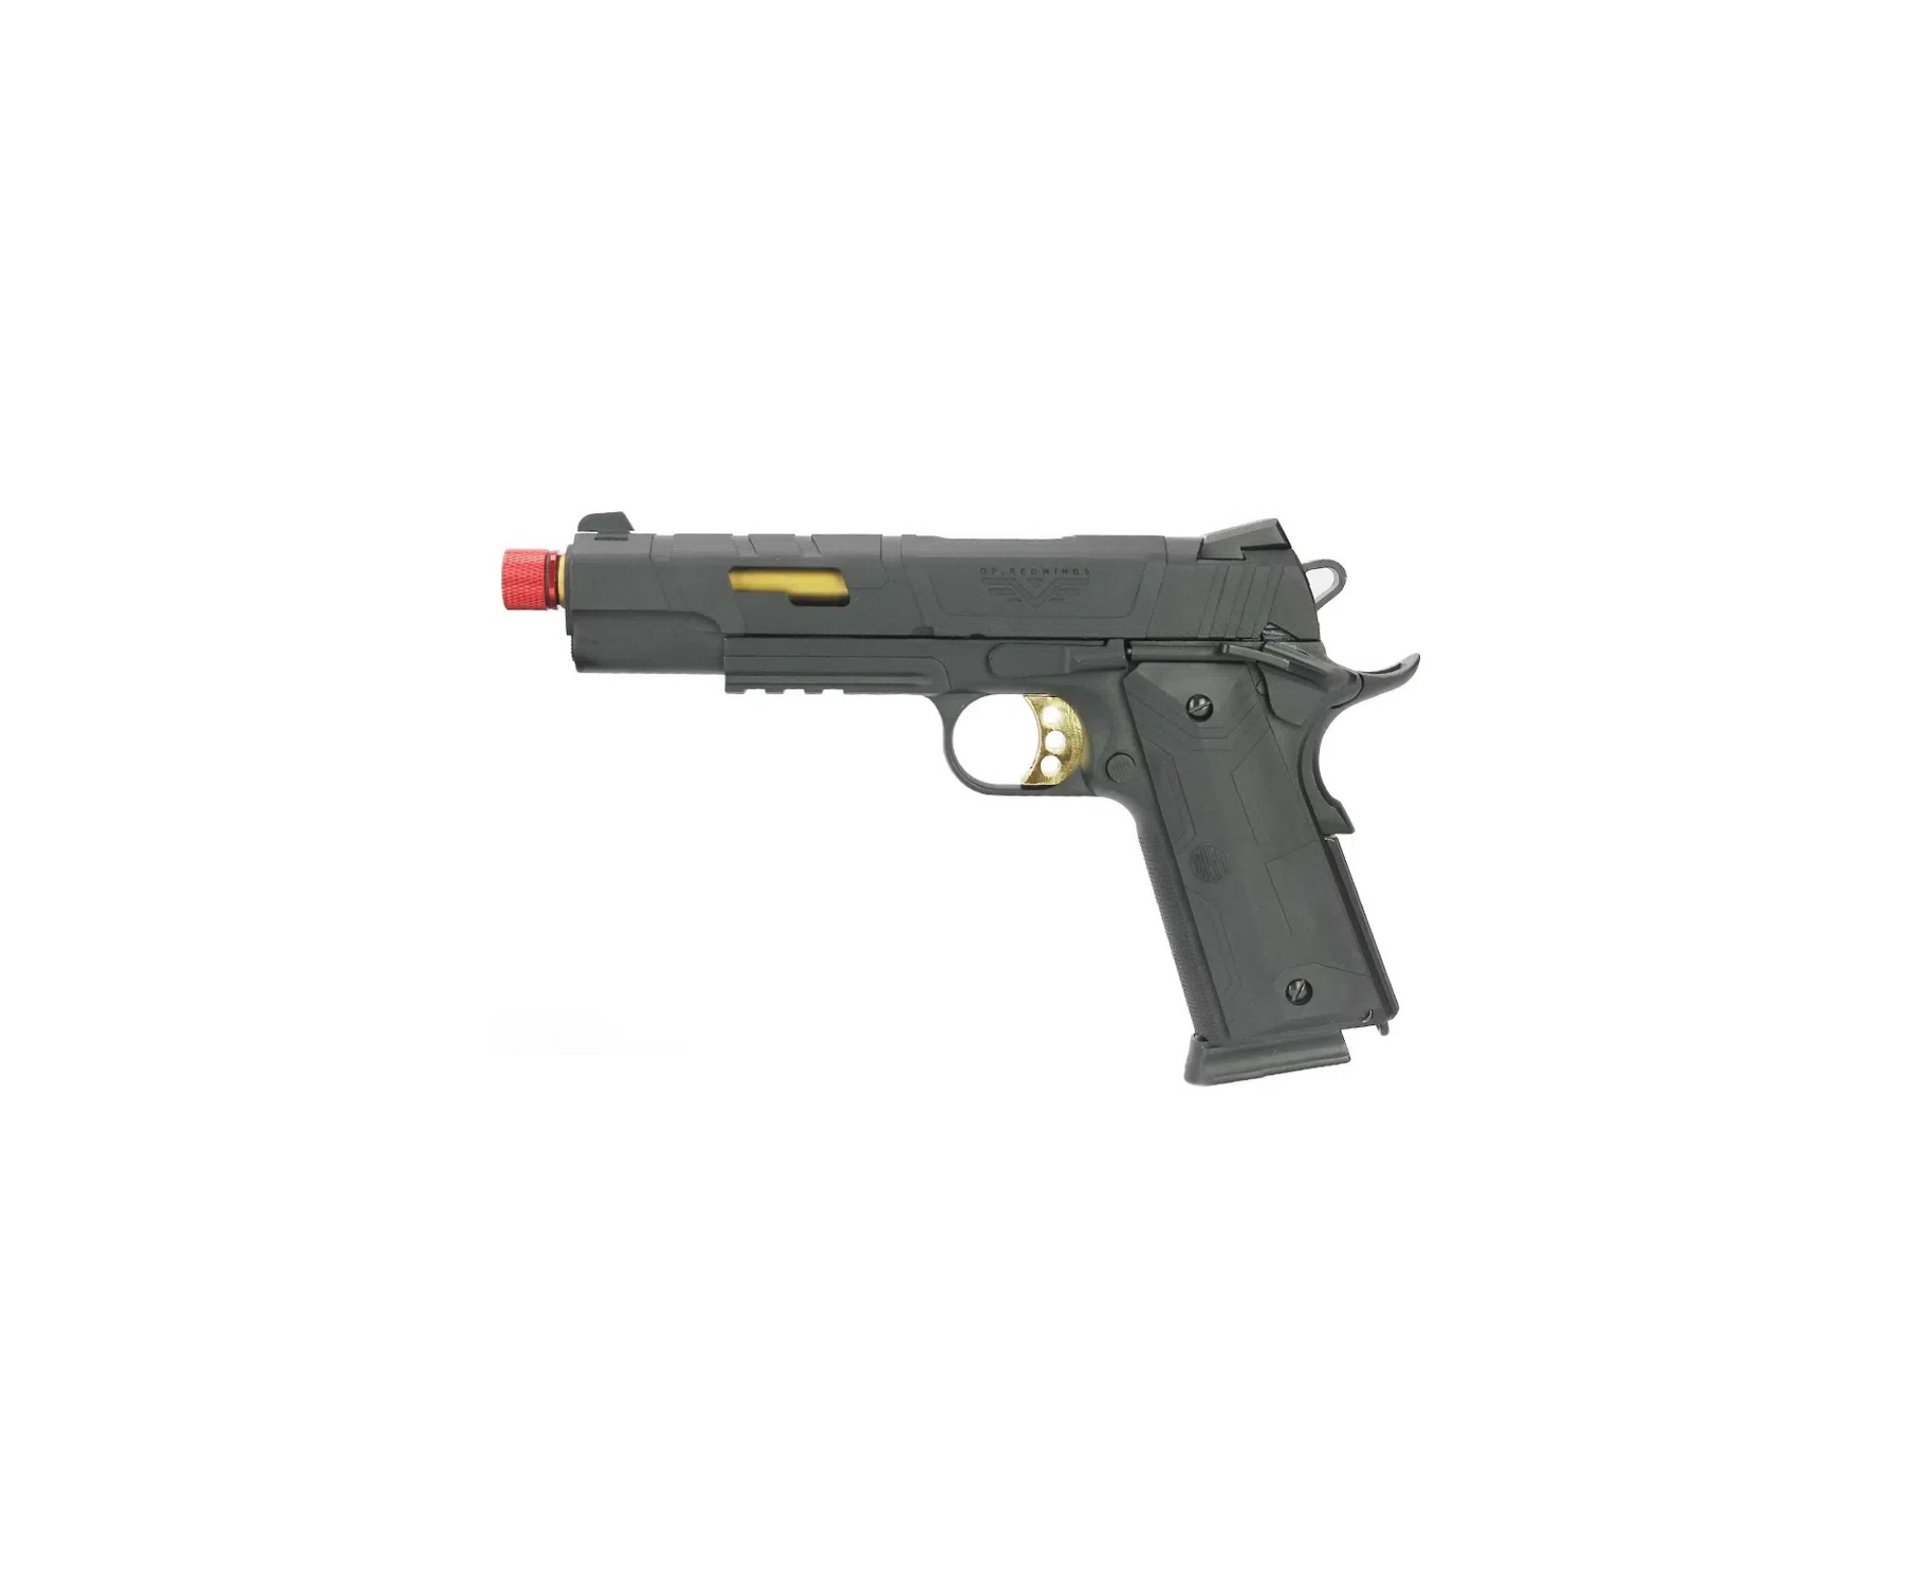 Pistola De Airsoft Redwings 1911 Rossi Gold Green Gas Com Blowback 6mm + Cilindro Green Gas + BBs